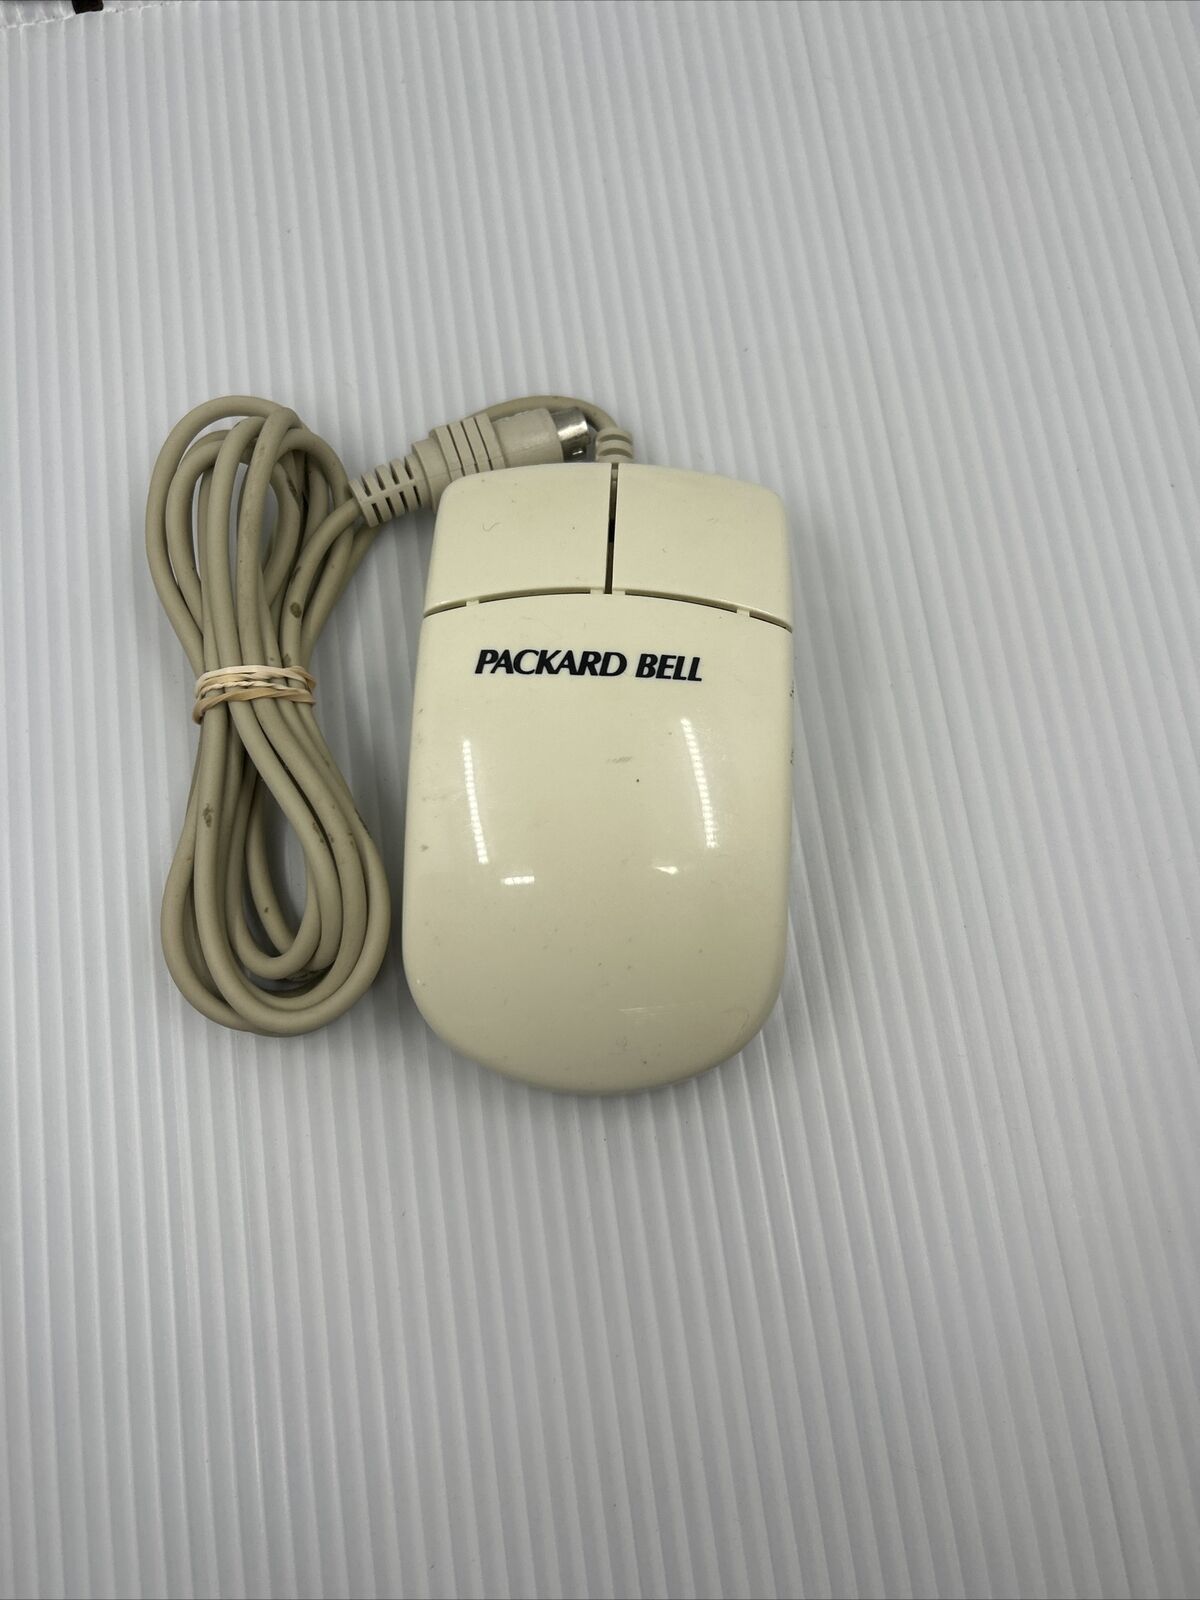 PACKARD BELL PS/2-Mouse Vintage 2-Button Ball Mouse ✔✔✔✔